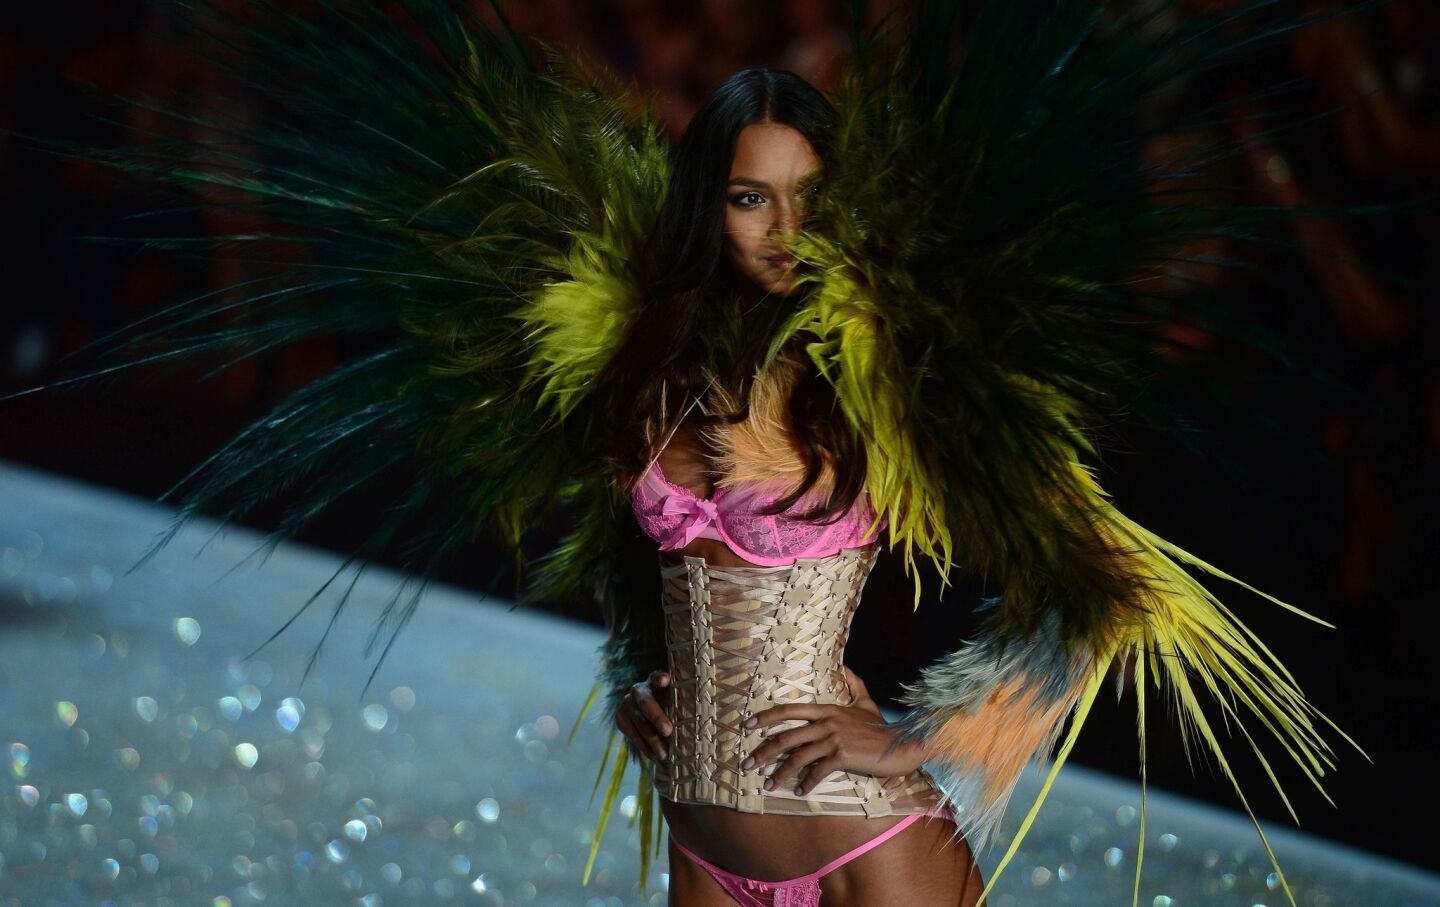 A model walks the runway at the 2013 Victoria's Secret Fashion Show on Wednesday.